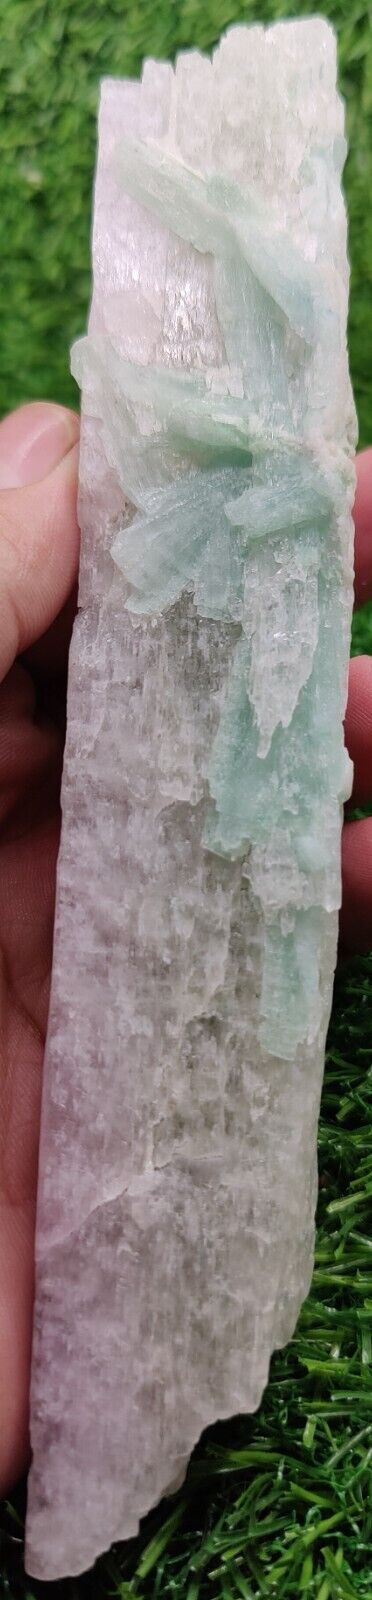 Beautiful Kunzite Specimen Assoicated with Blue Tourmaline from Afghanistan